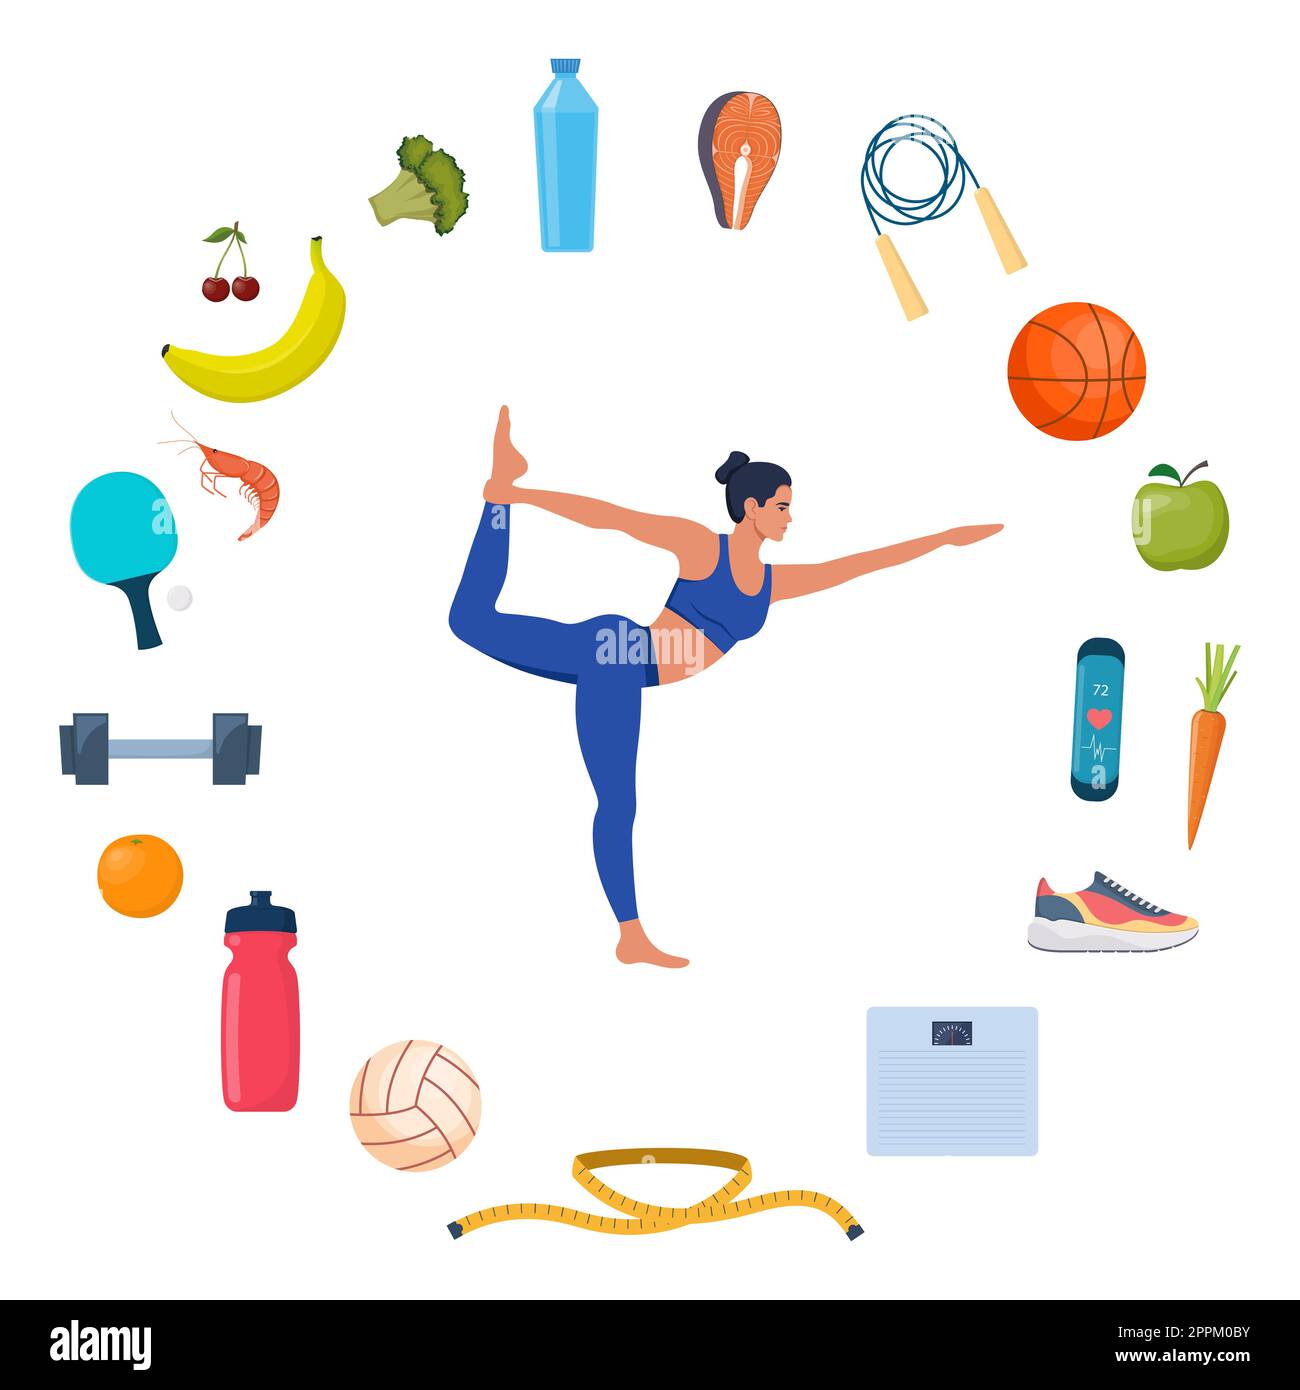 Woman doing yoga exercises. Icons of healthy food, vegetables and